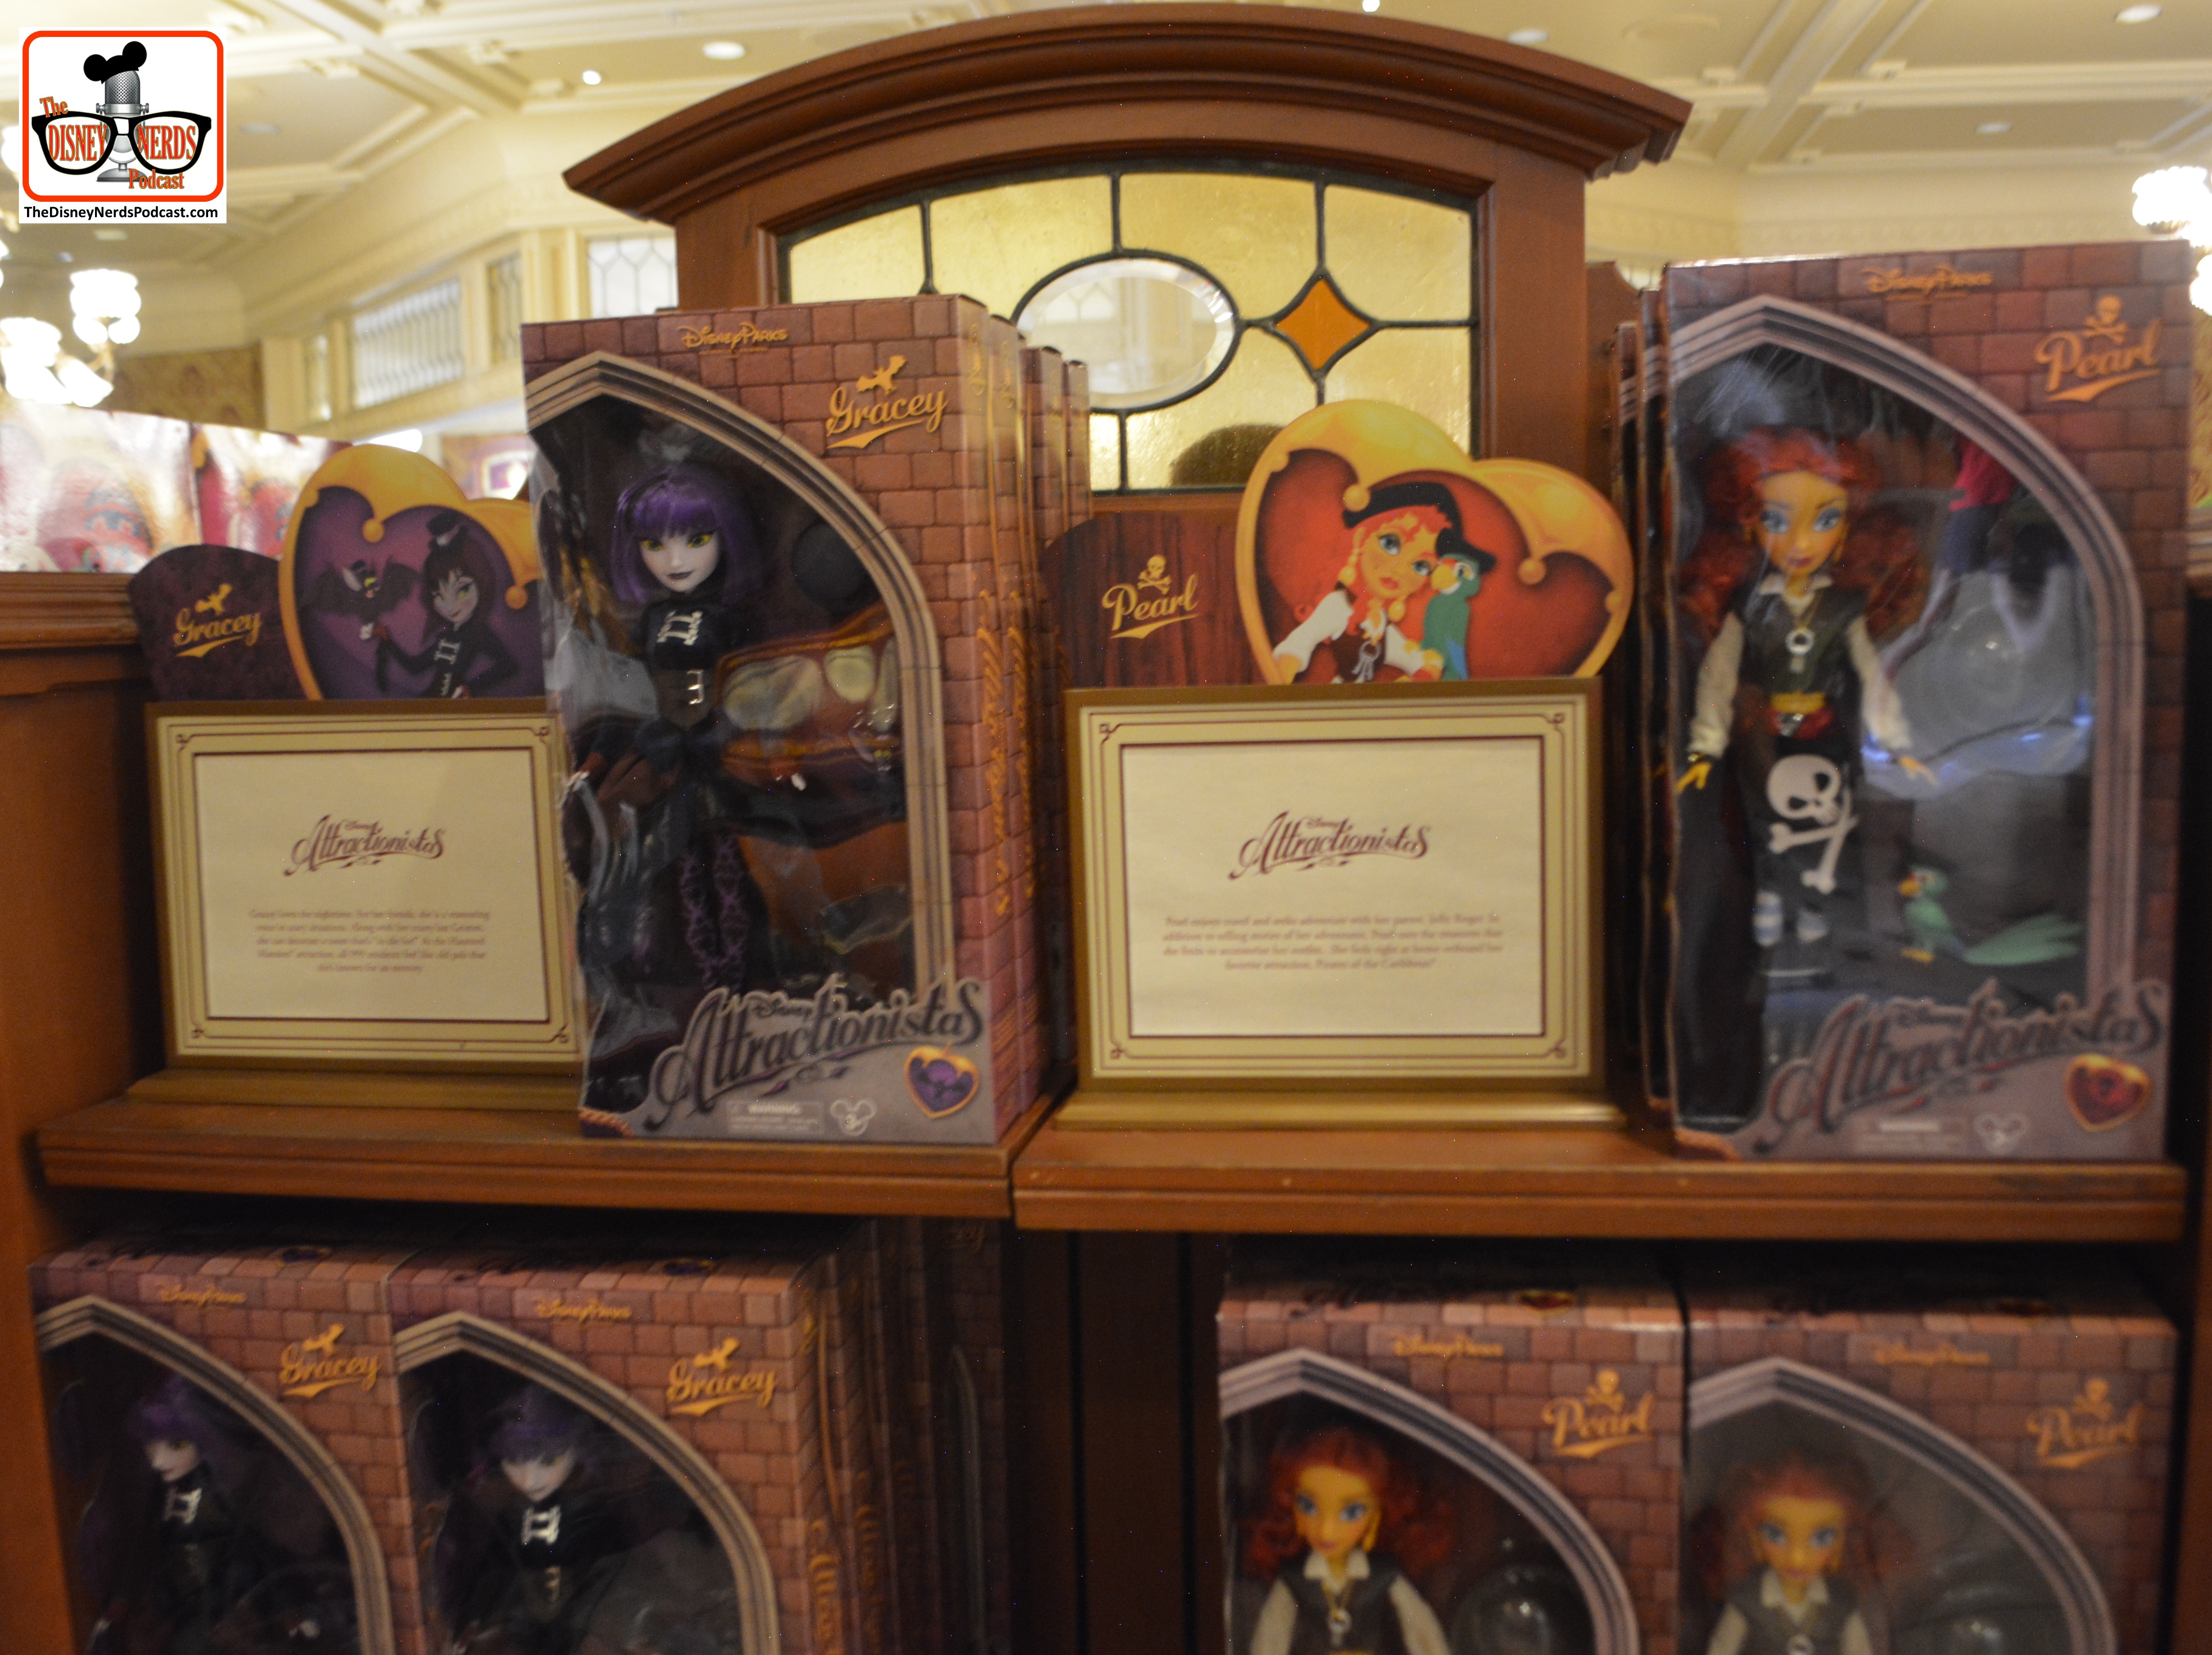 Attractionistas - new collectible line of fashion dolls, each celebrating a classic Disney attraction.